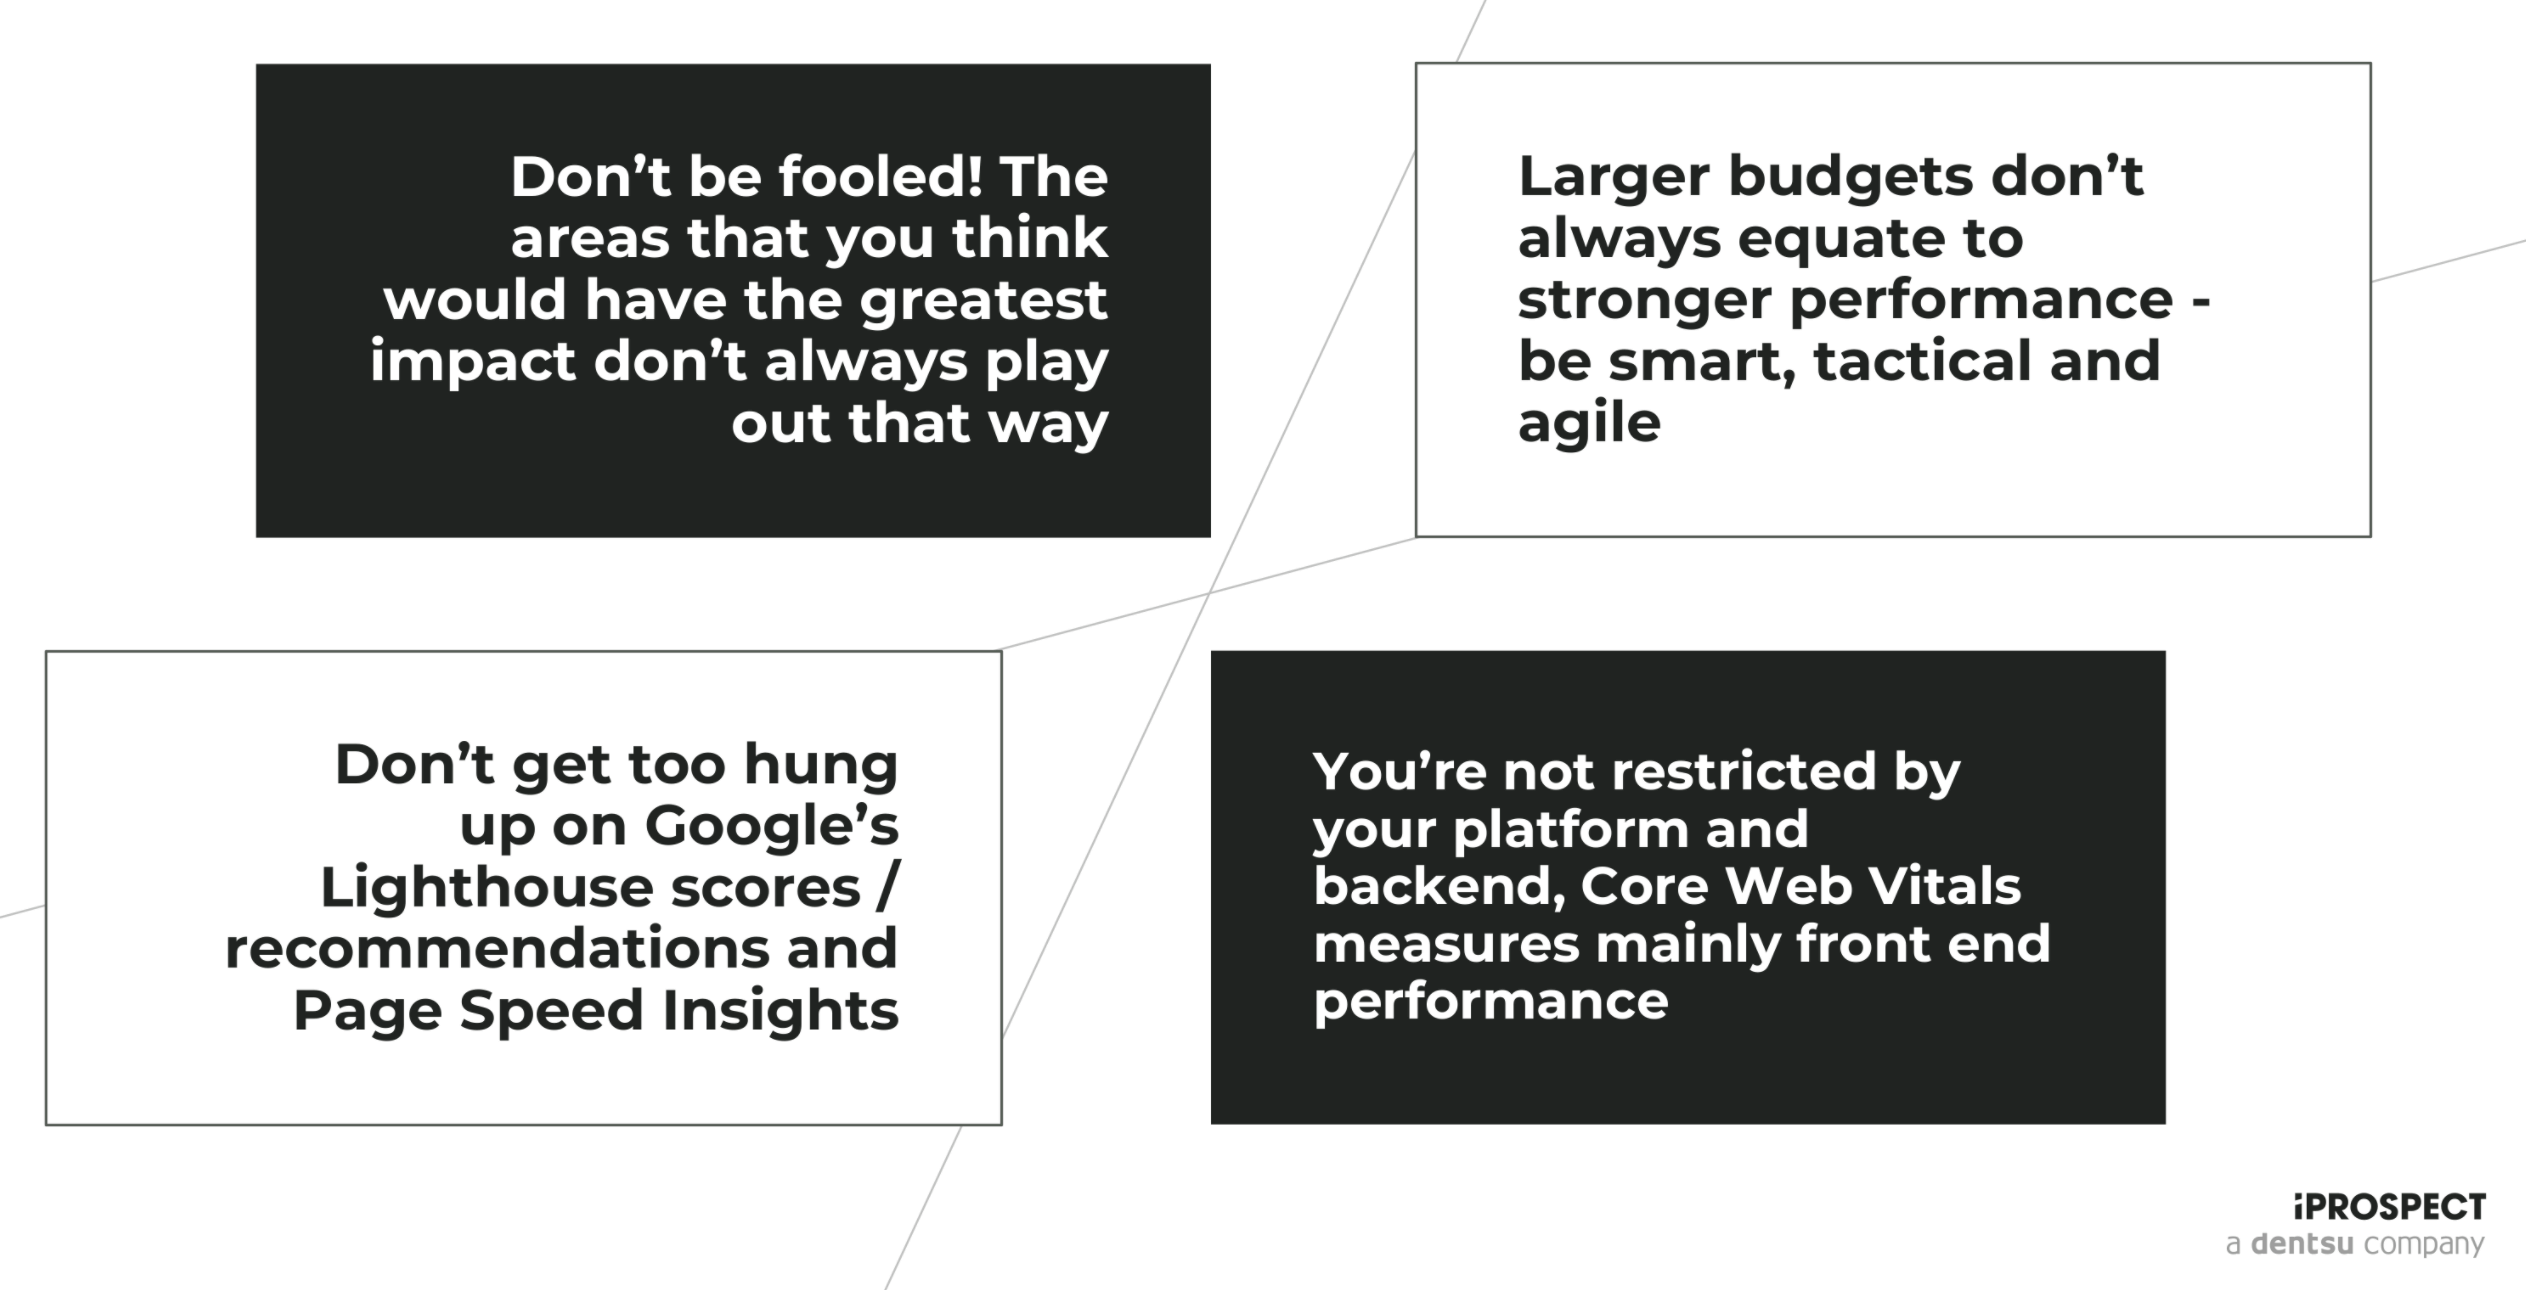 Key takeaways. The areas you think have the greatest impact don't always play out that way. Larger budgets don't equate to stronger performance. Don't get hung up on Google's Page Speed Insights. You're not restricted by your platform and backend, Core Web Vitals mainly measures front-end performance.